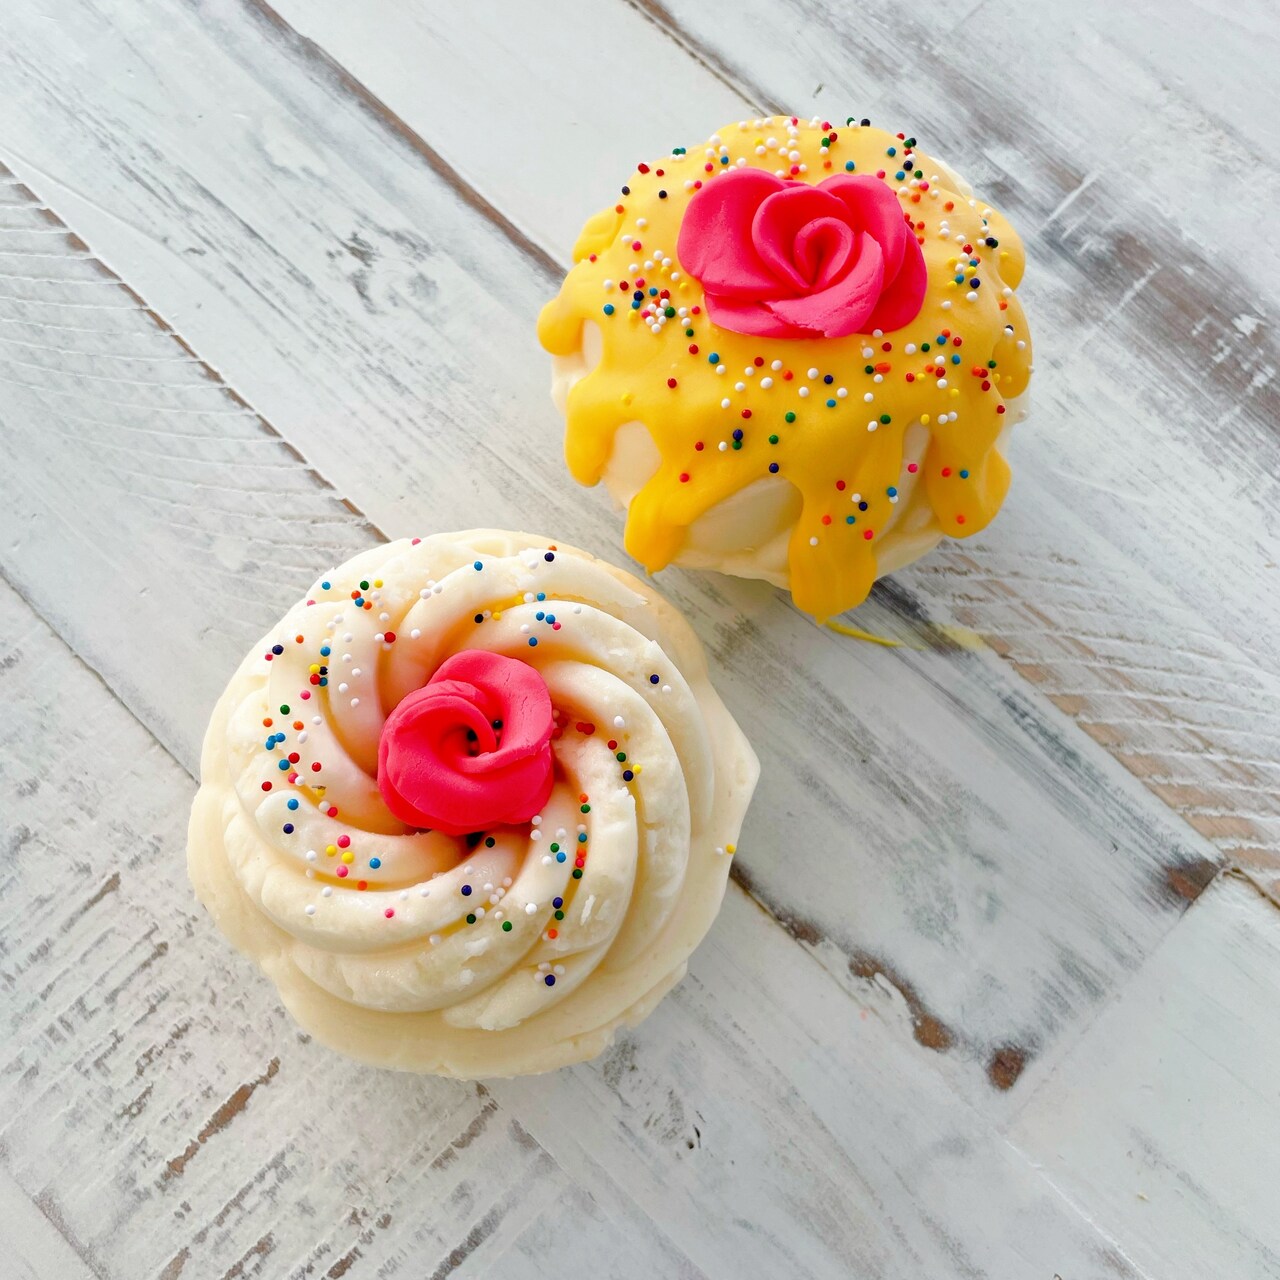 Cupcake Buttercream Decorations with @wildbakes